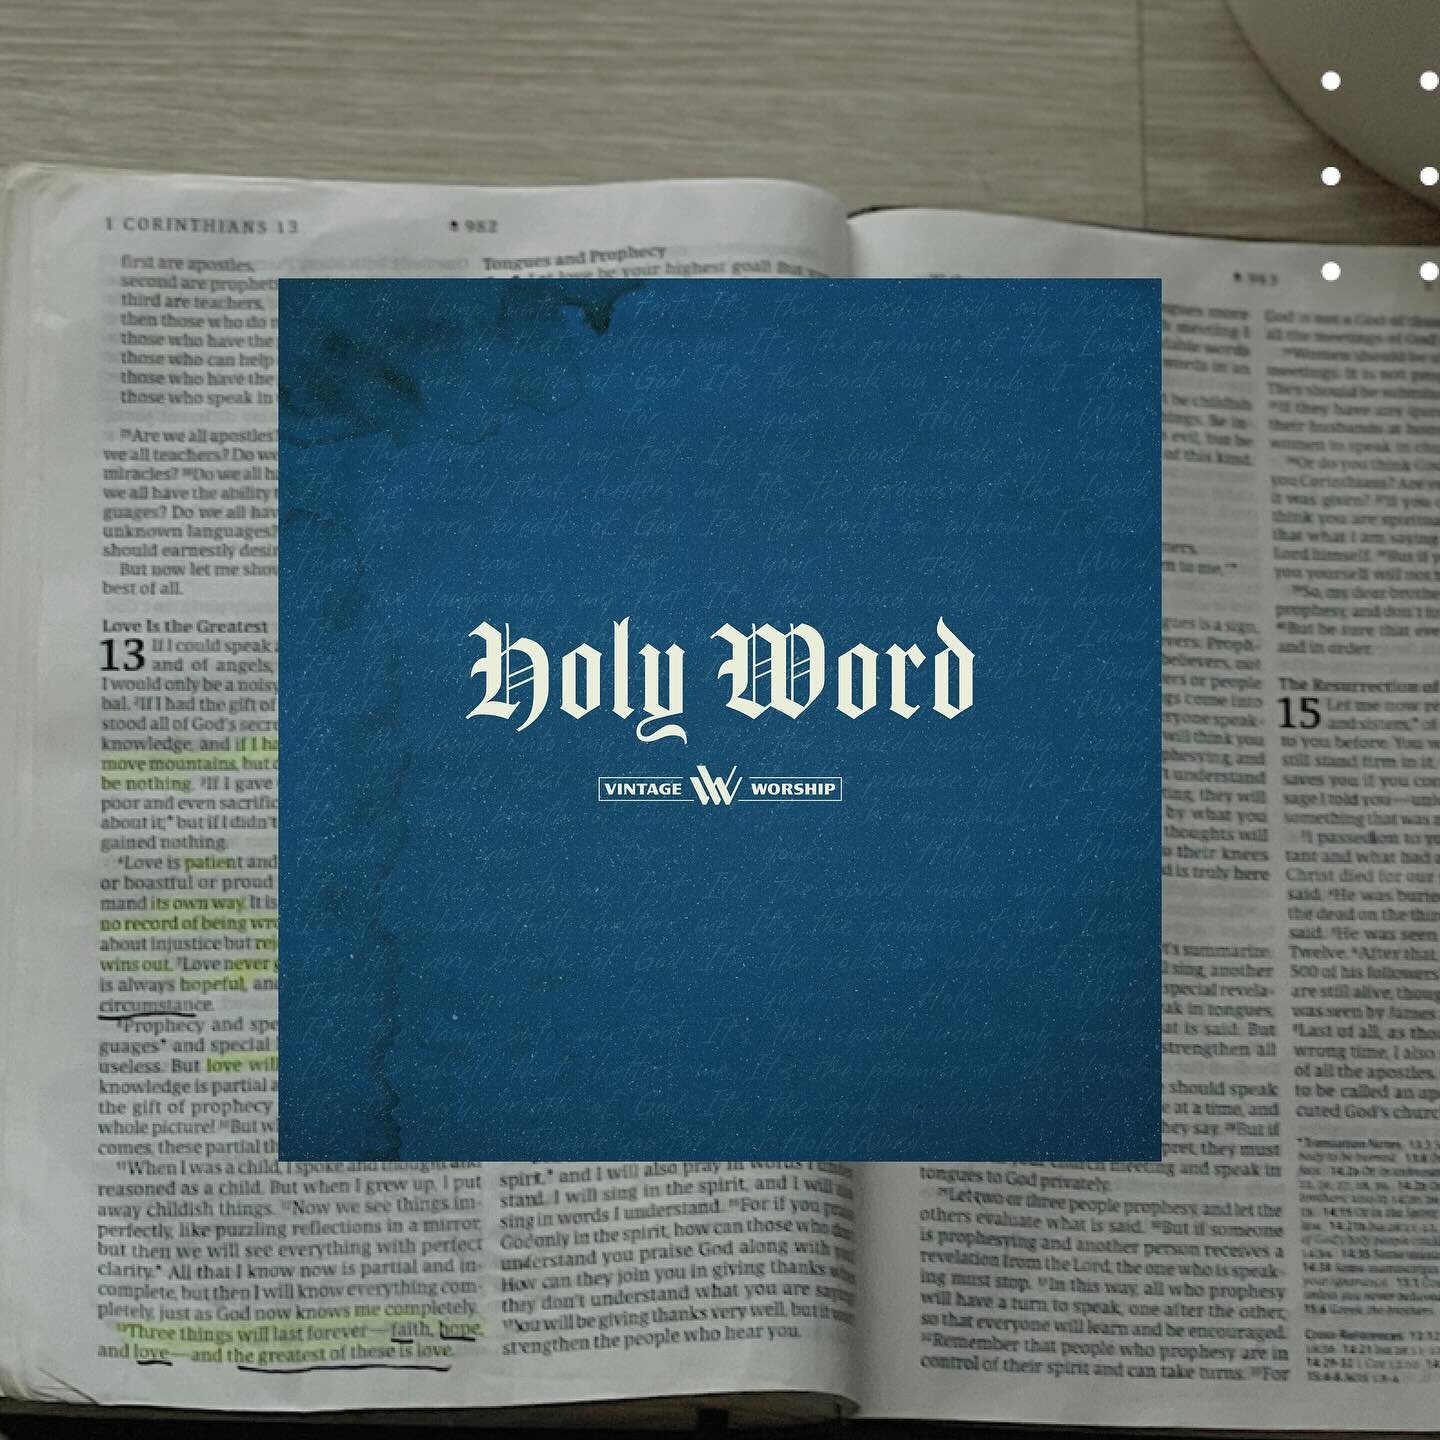 NEW MUSIC FRIDAY 23.02.24
.
.
🐟 @vintage_worship with &lsquo;Holy Word&rsquo;
🐟 @saintelura with their latest single &rsquo;Not Ready To Lose You&rsquo;
🐟 @daniel_psalmist releases &lsquo;WE WIN&rsquo;
🐟 @jaimejamgochian with &lsquo;If God Wrote 